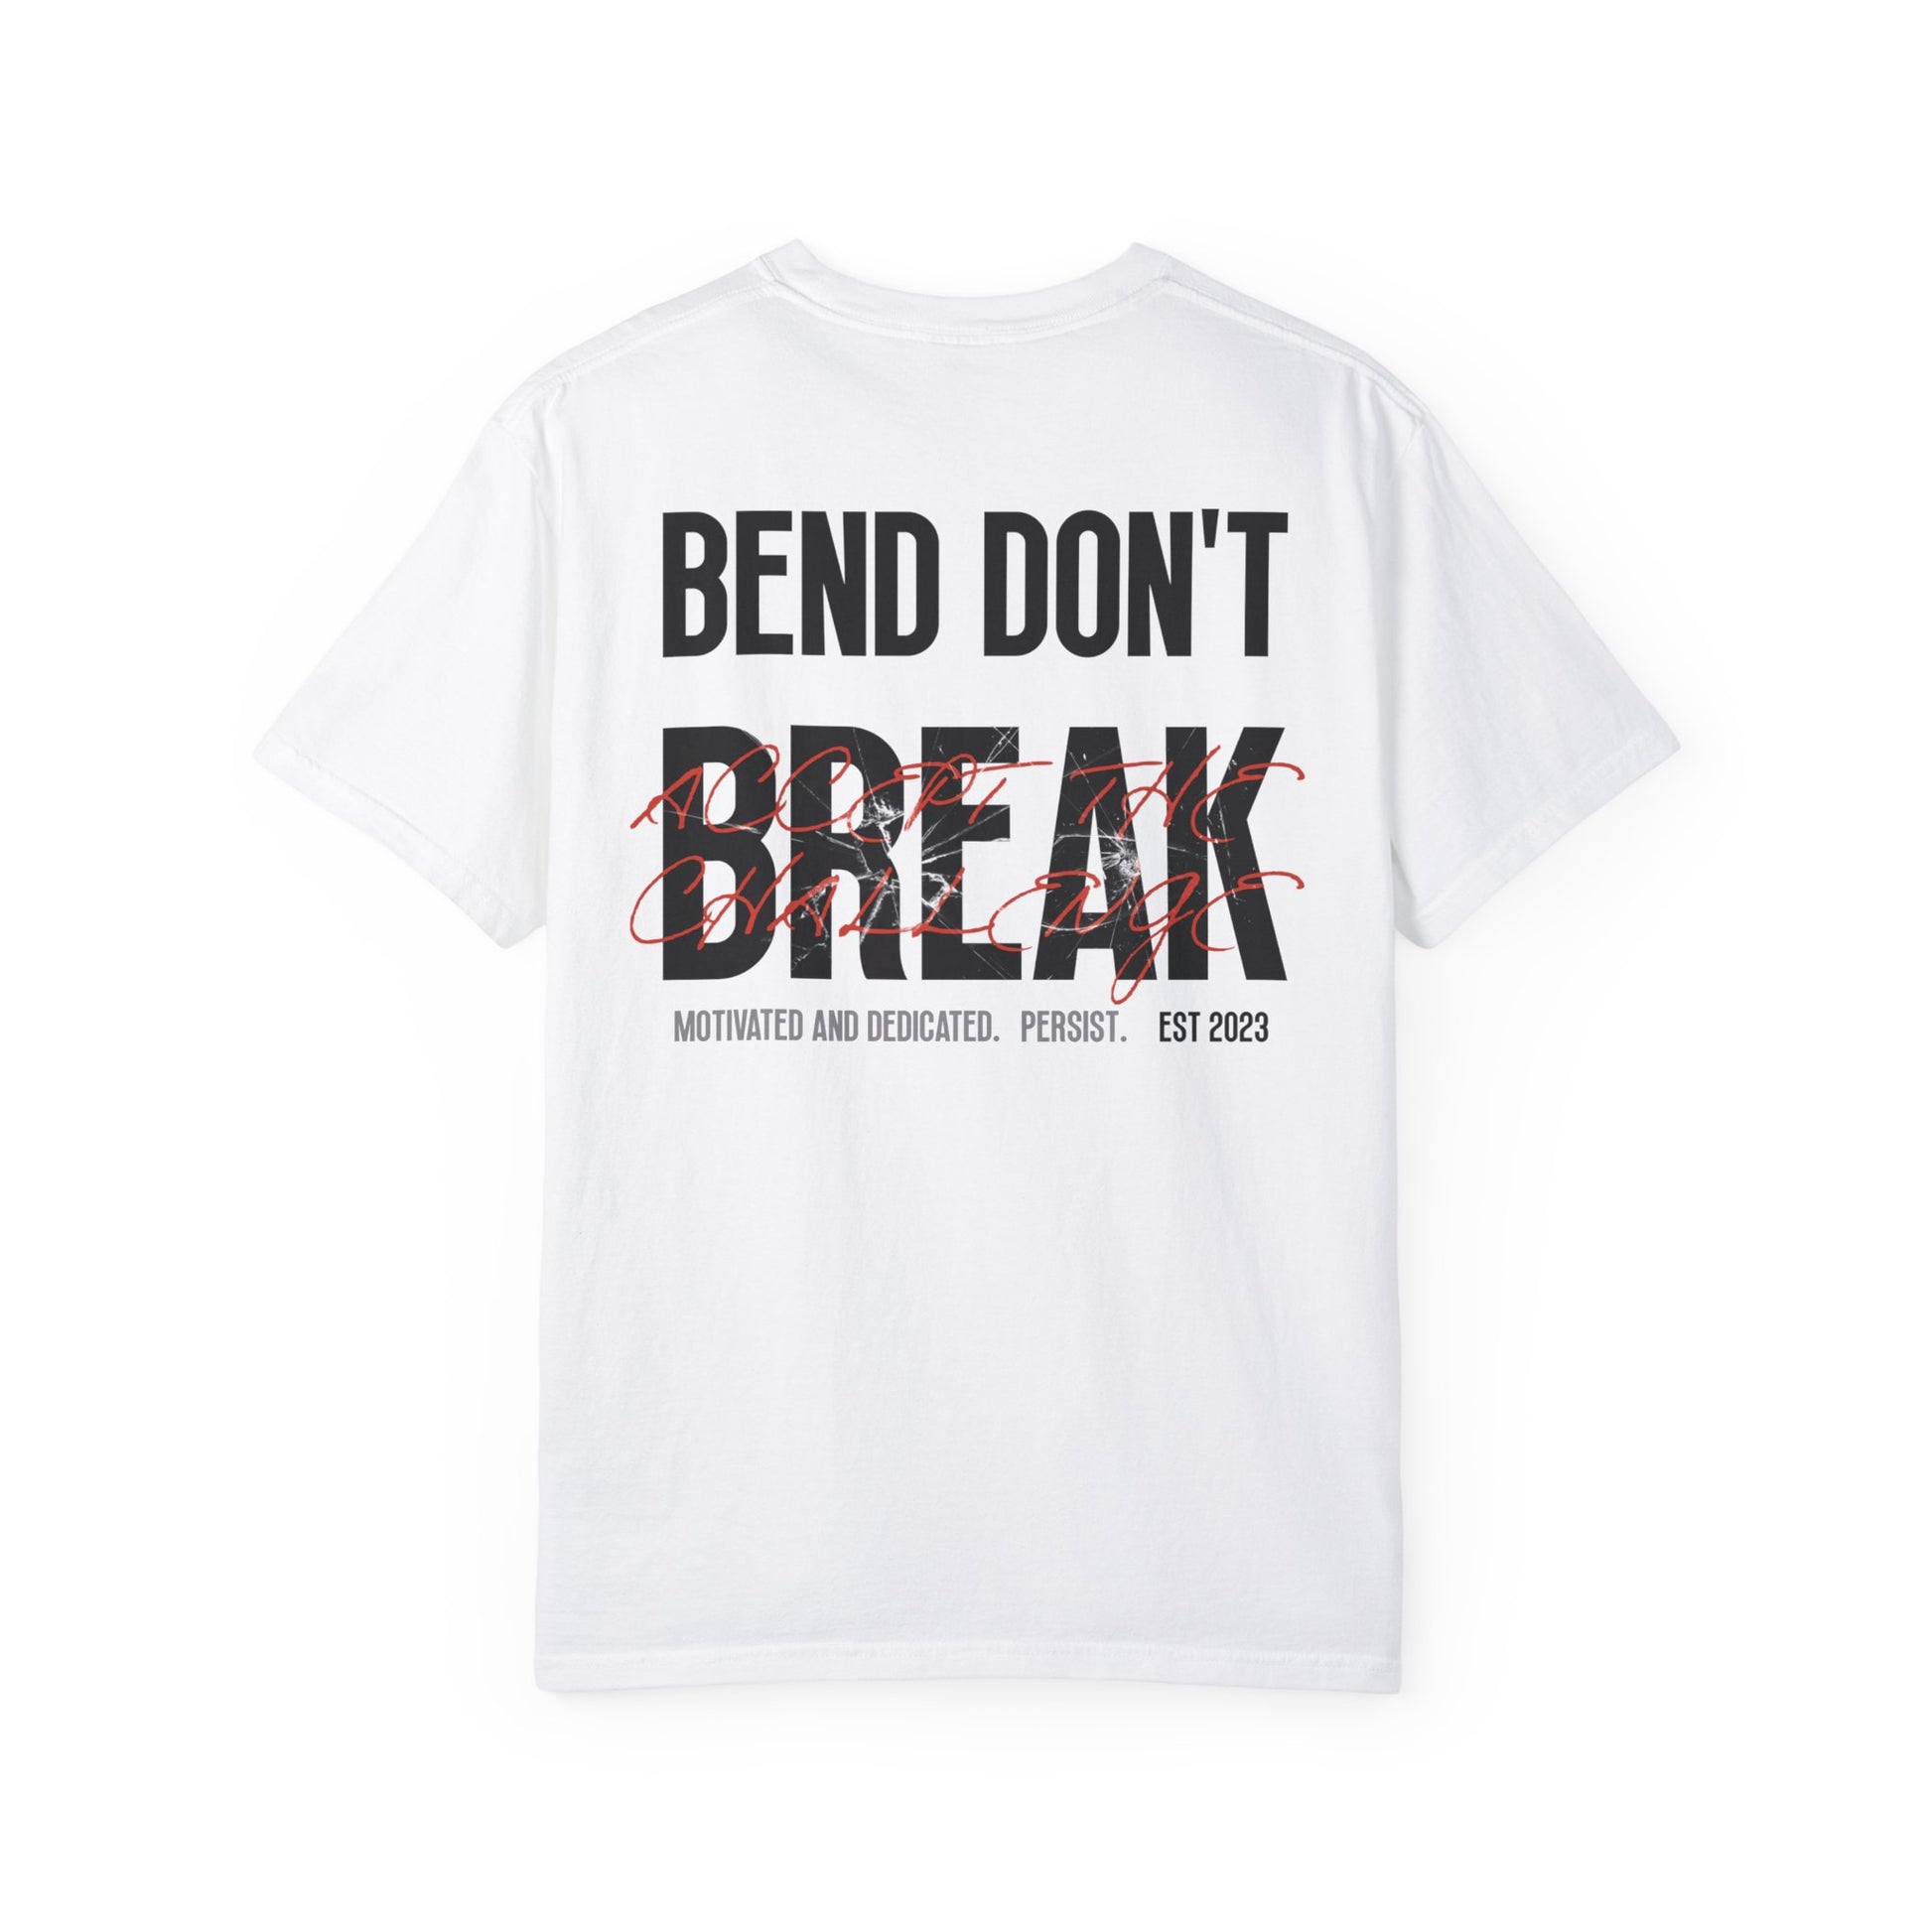 Casual White T-Shirt w/ Text And Broken Glass Graphic